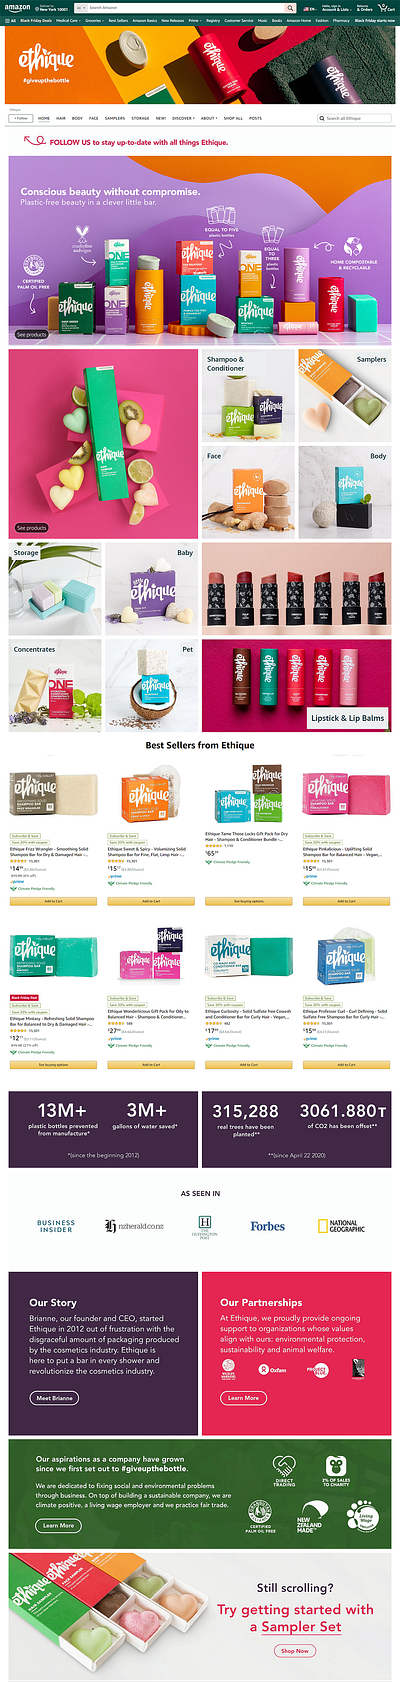 Amazon Storefront - Ethquie Storefront a content amazon amazon store amazon storefront amazon storefront design graphic design listing product images manipulation product design product designing product photography